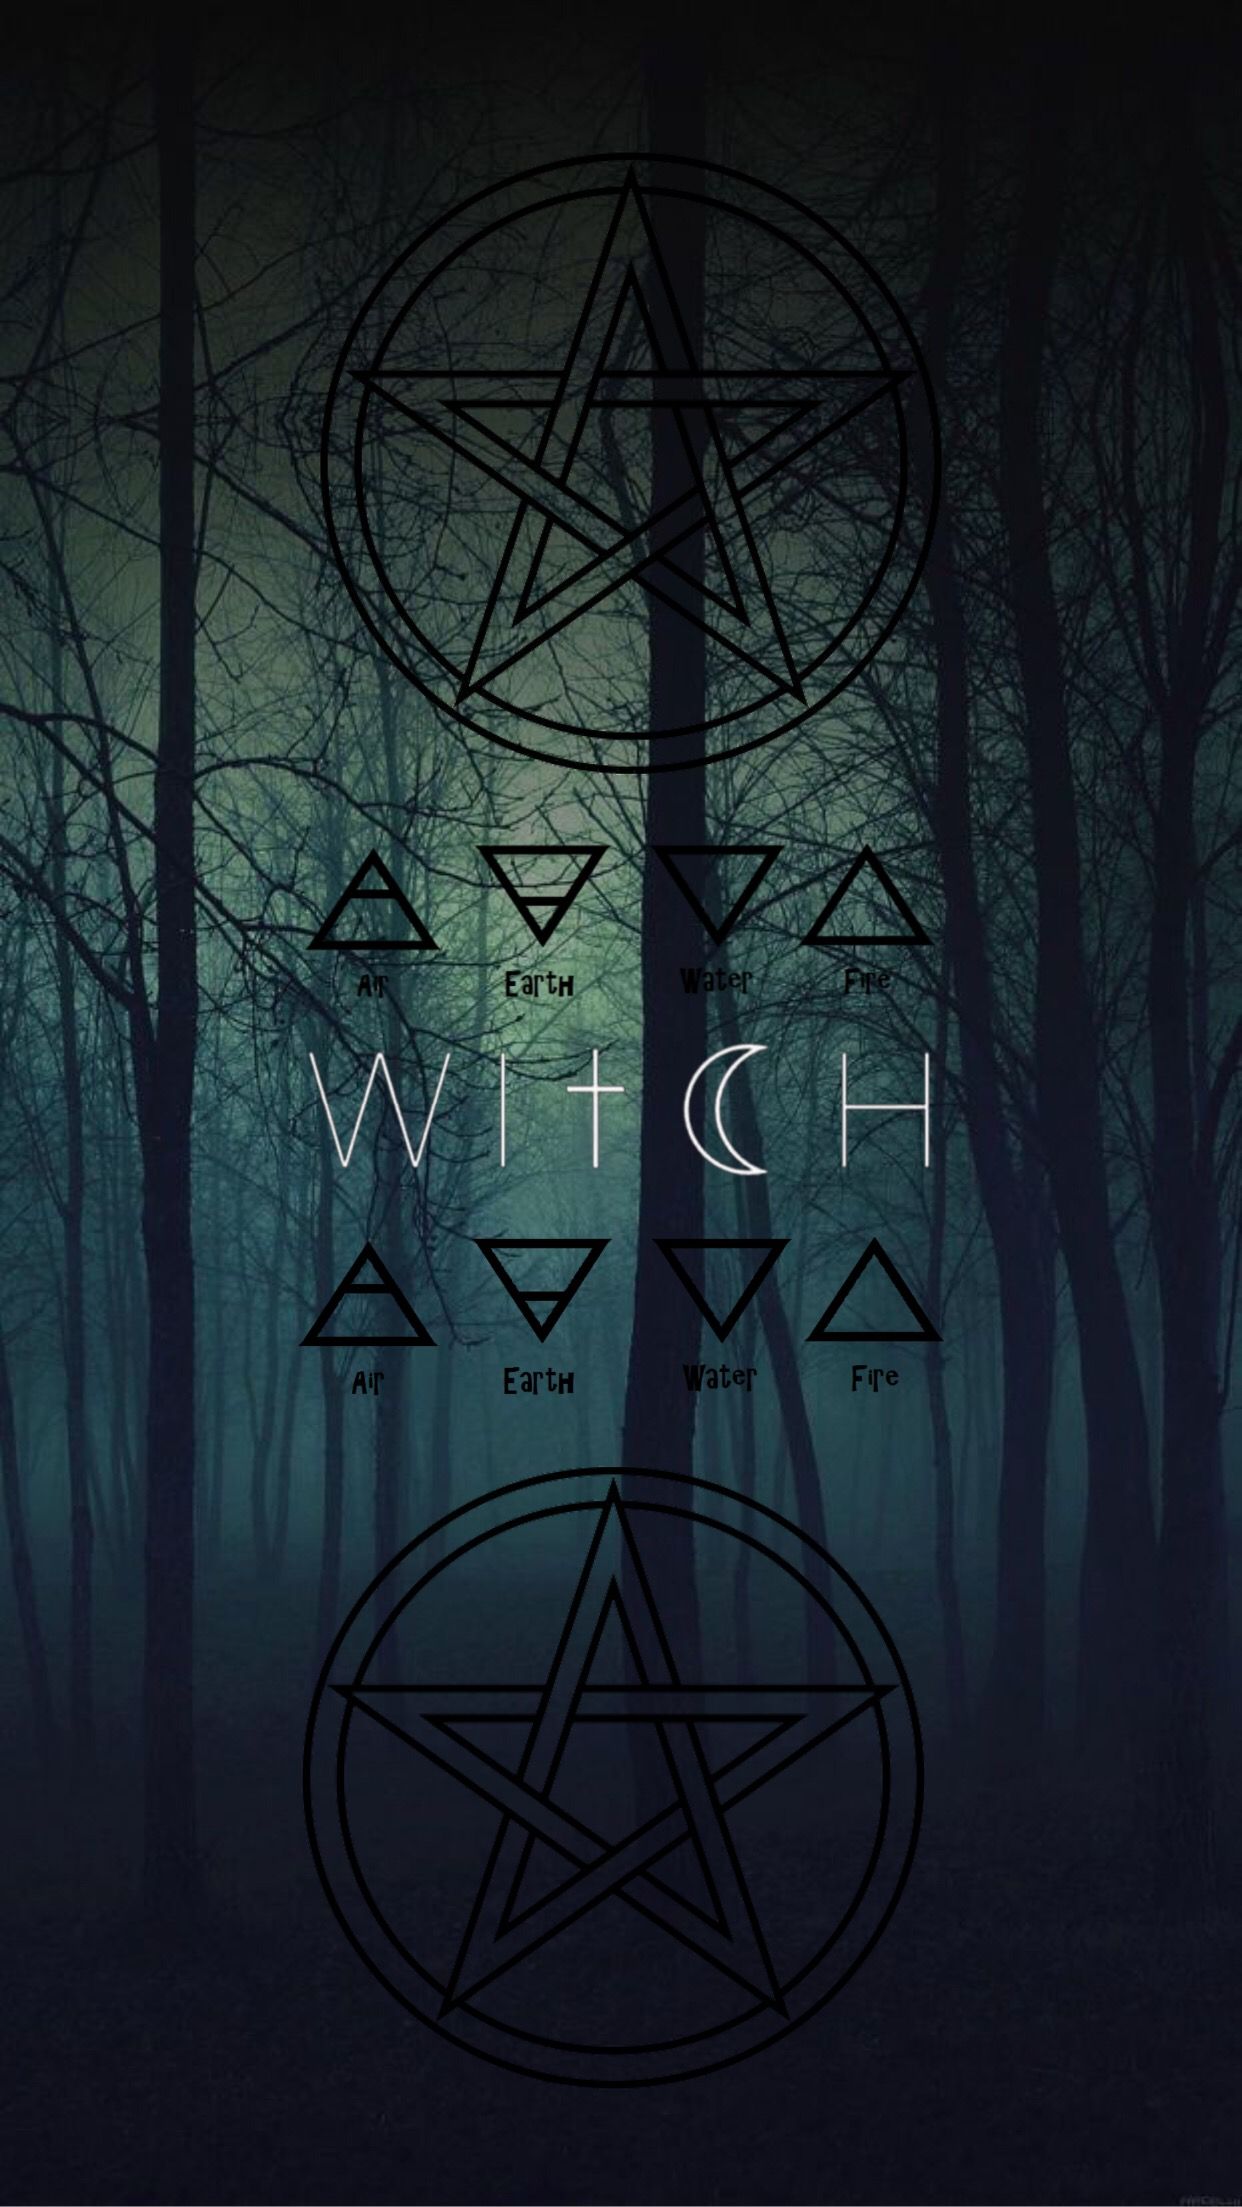 Top 12 Witchy Wallpapers for a Mystical Room